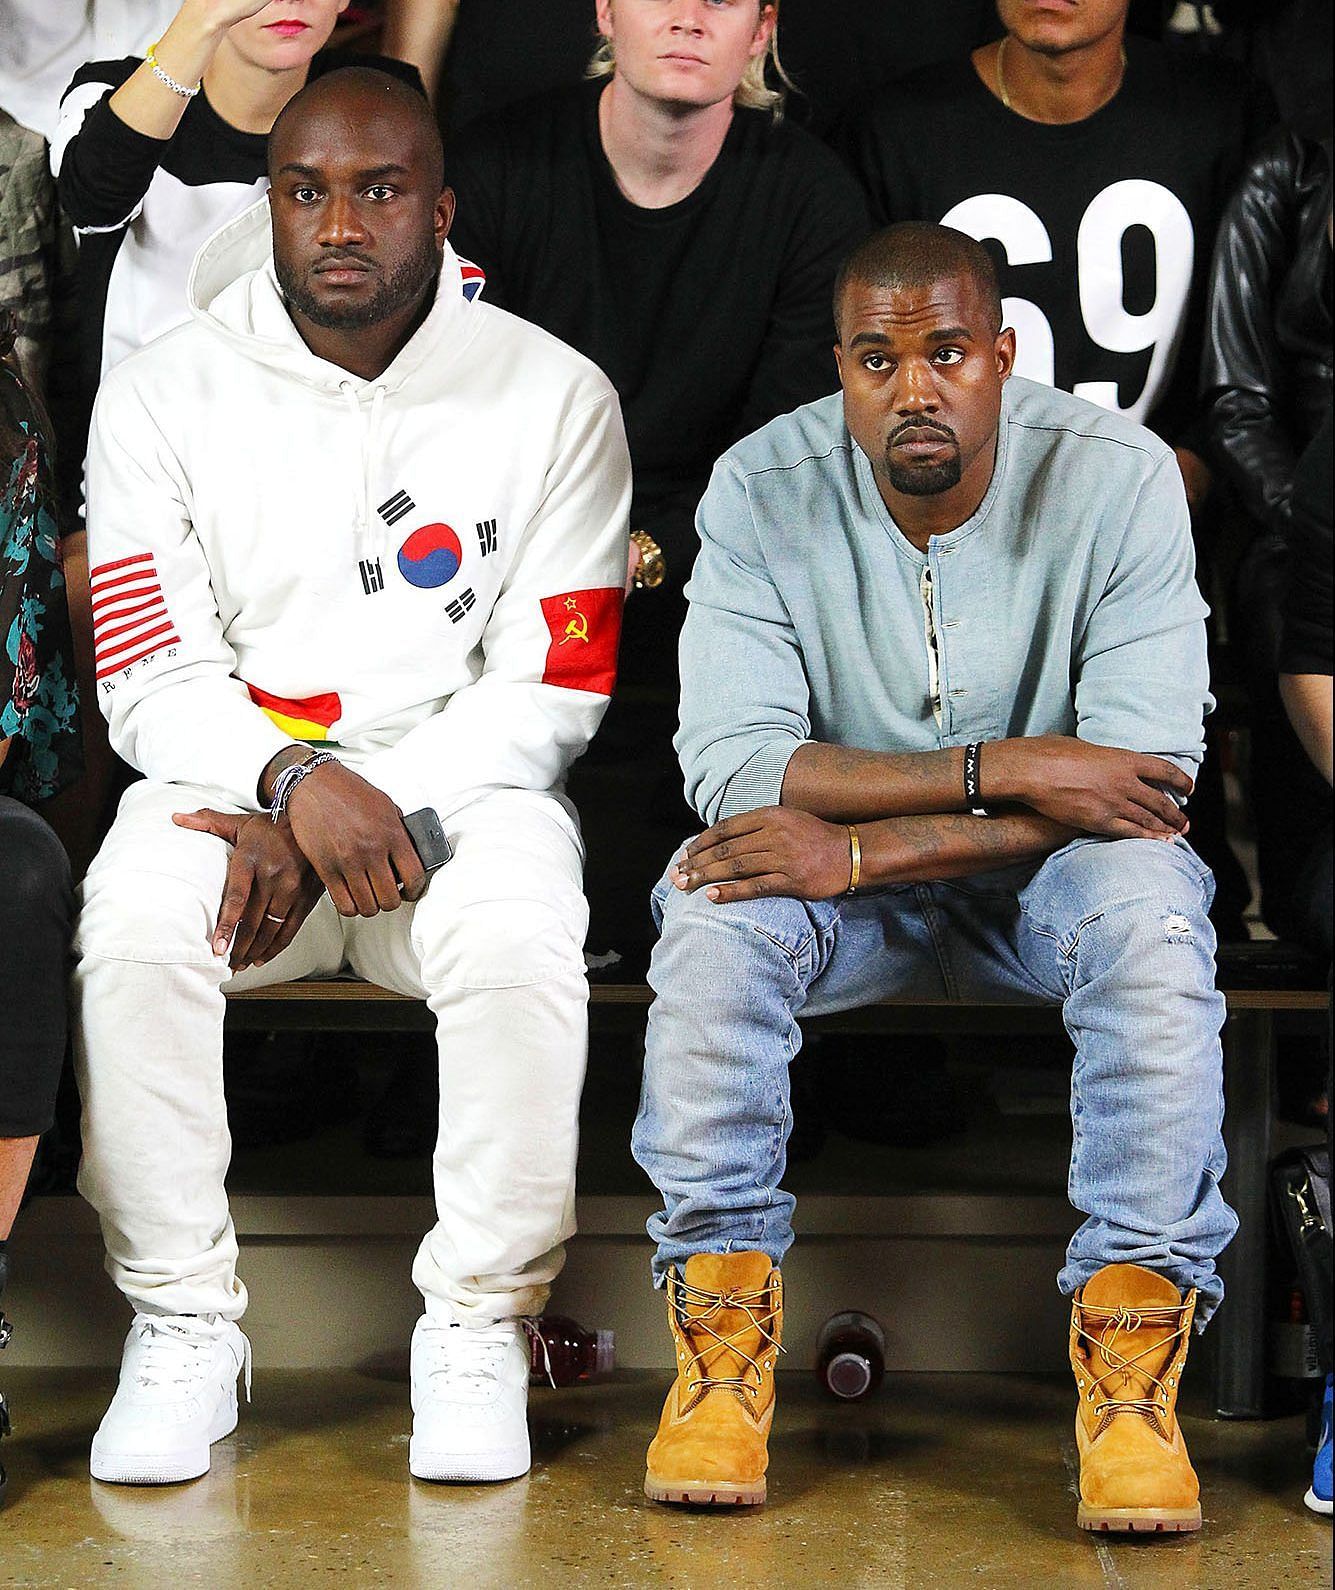 Virgil Abloh: The work Kanye West and I do is like climbing Mount Everest